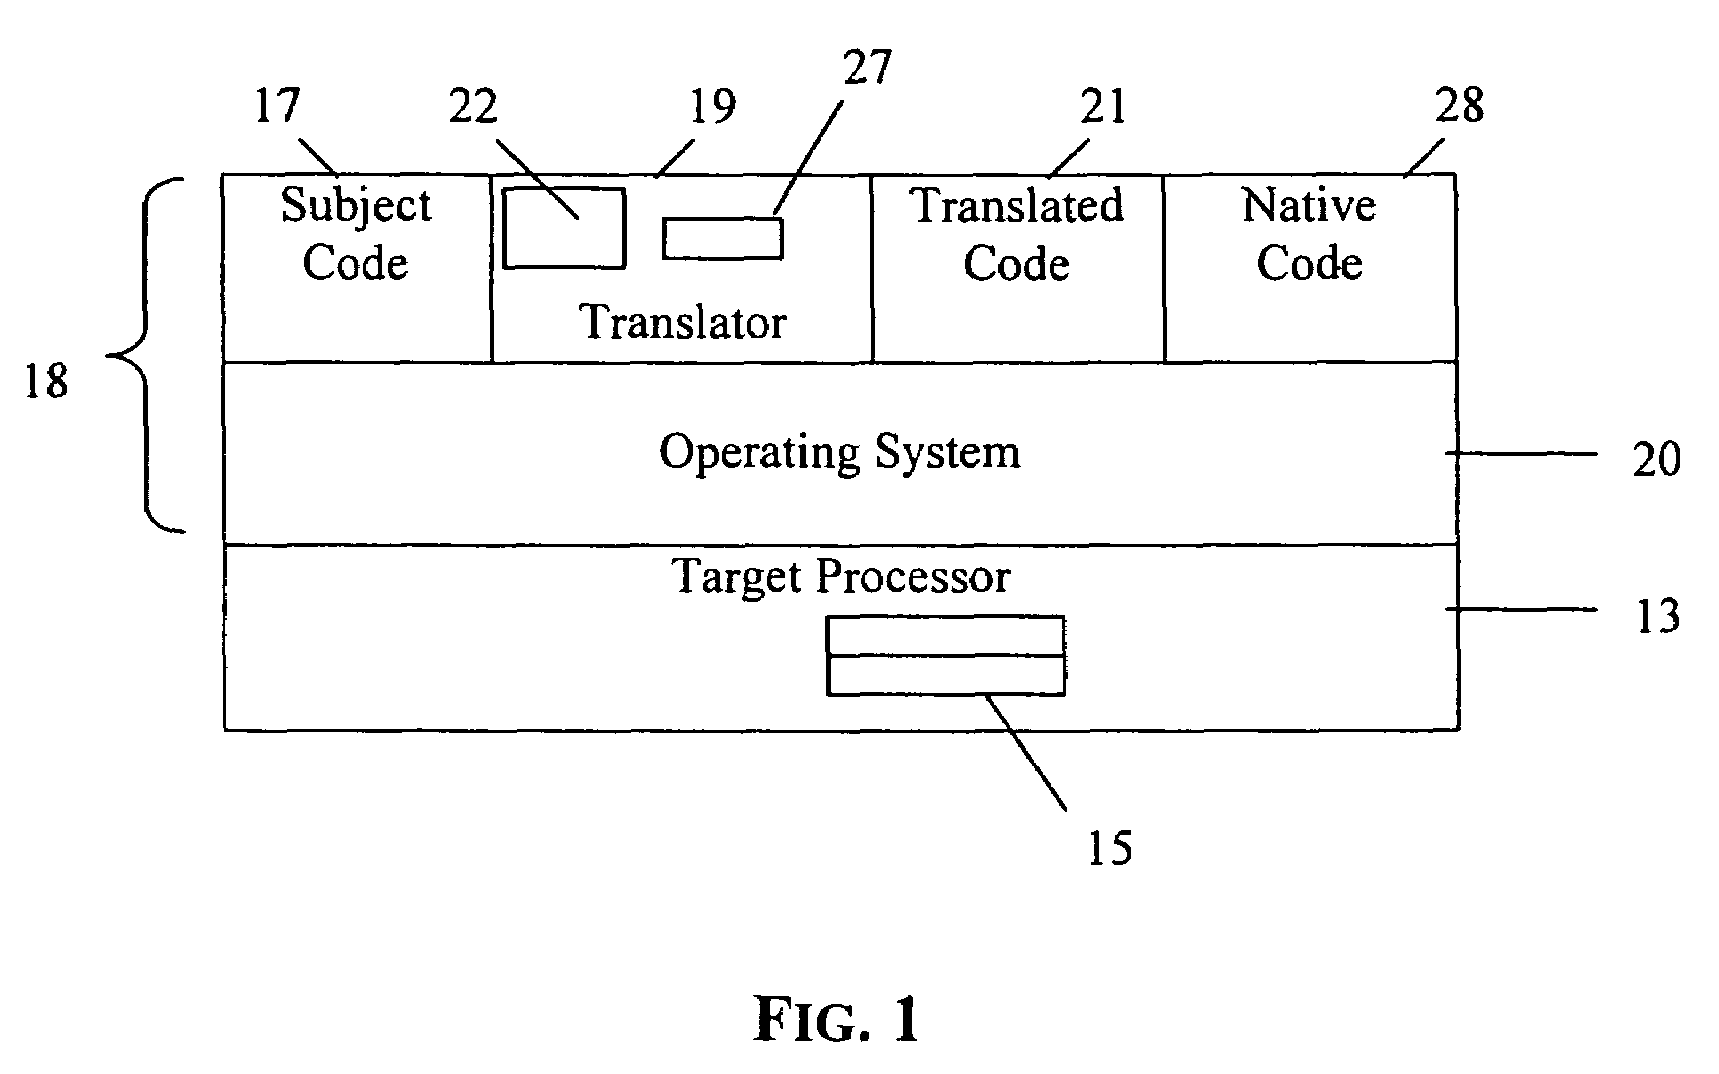 Method and apparatus for performing native binding to execute native code